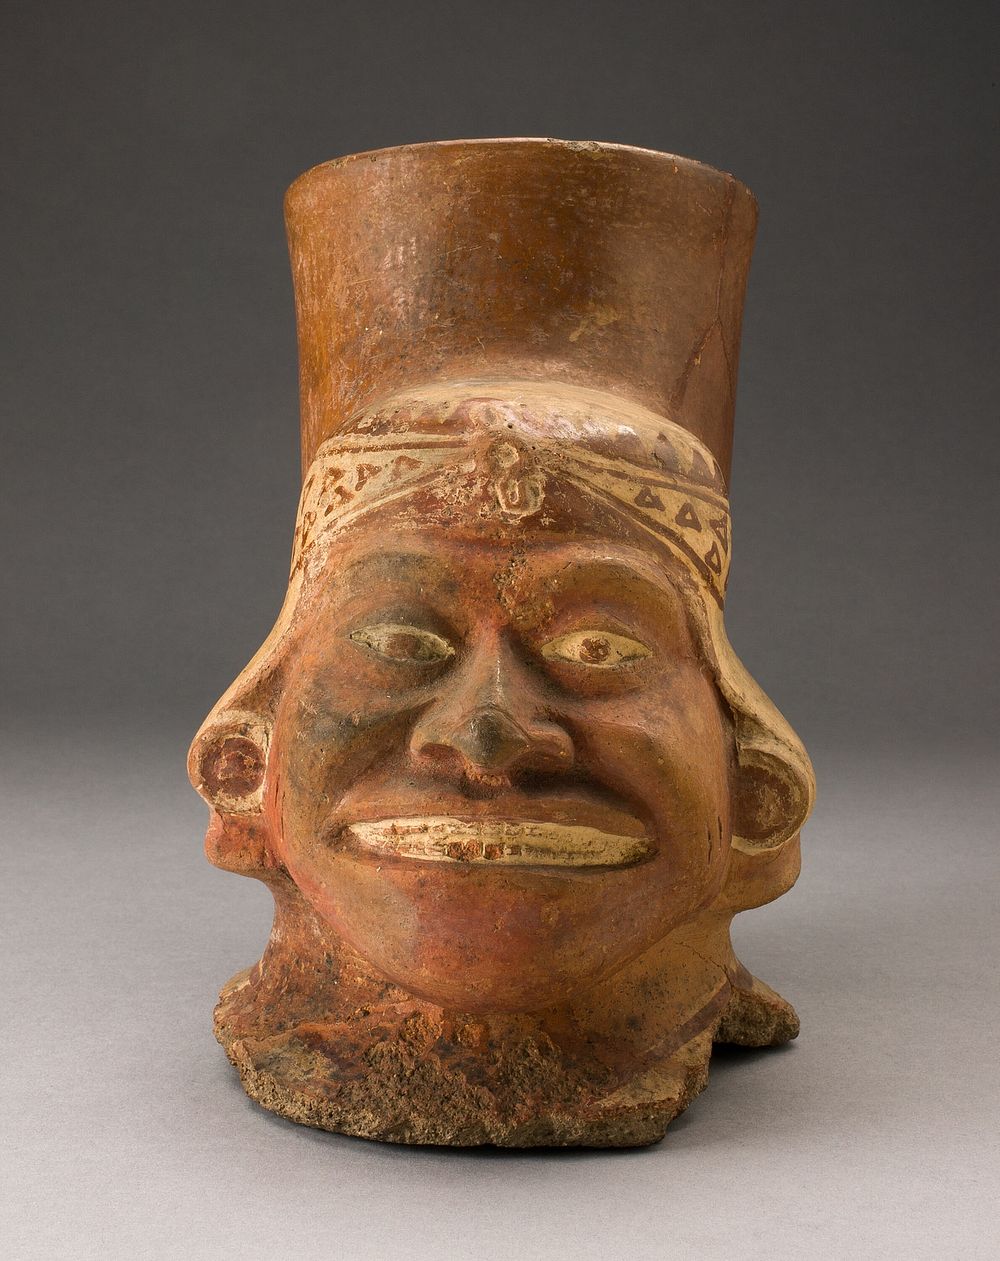 Fragment of a Jar In the Form of a Human Head with a Wrapped-Textile Headdress by Moche